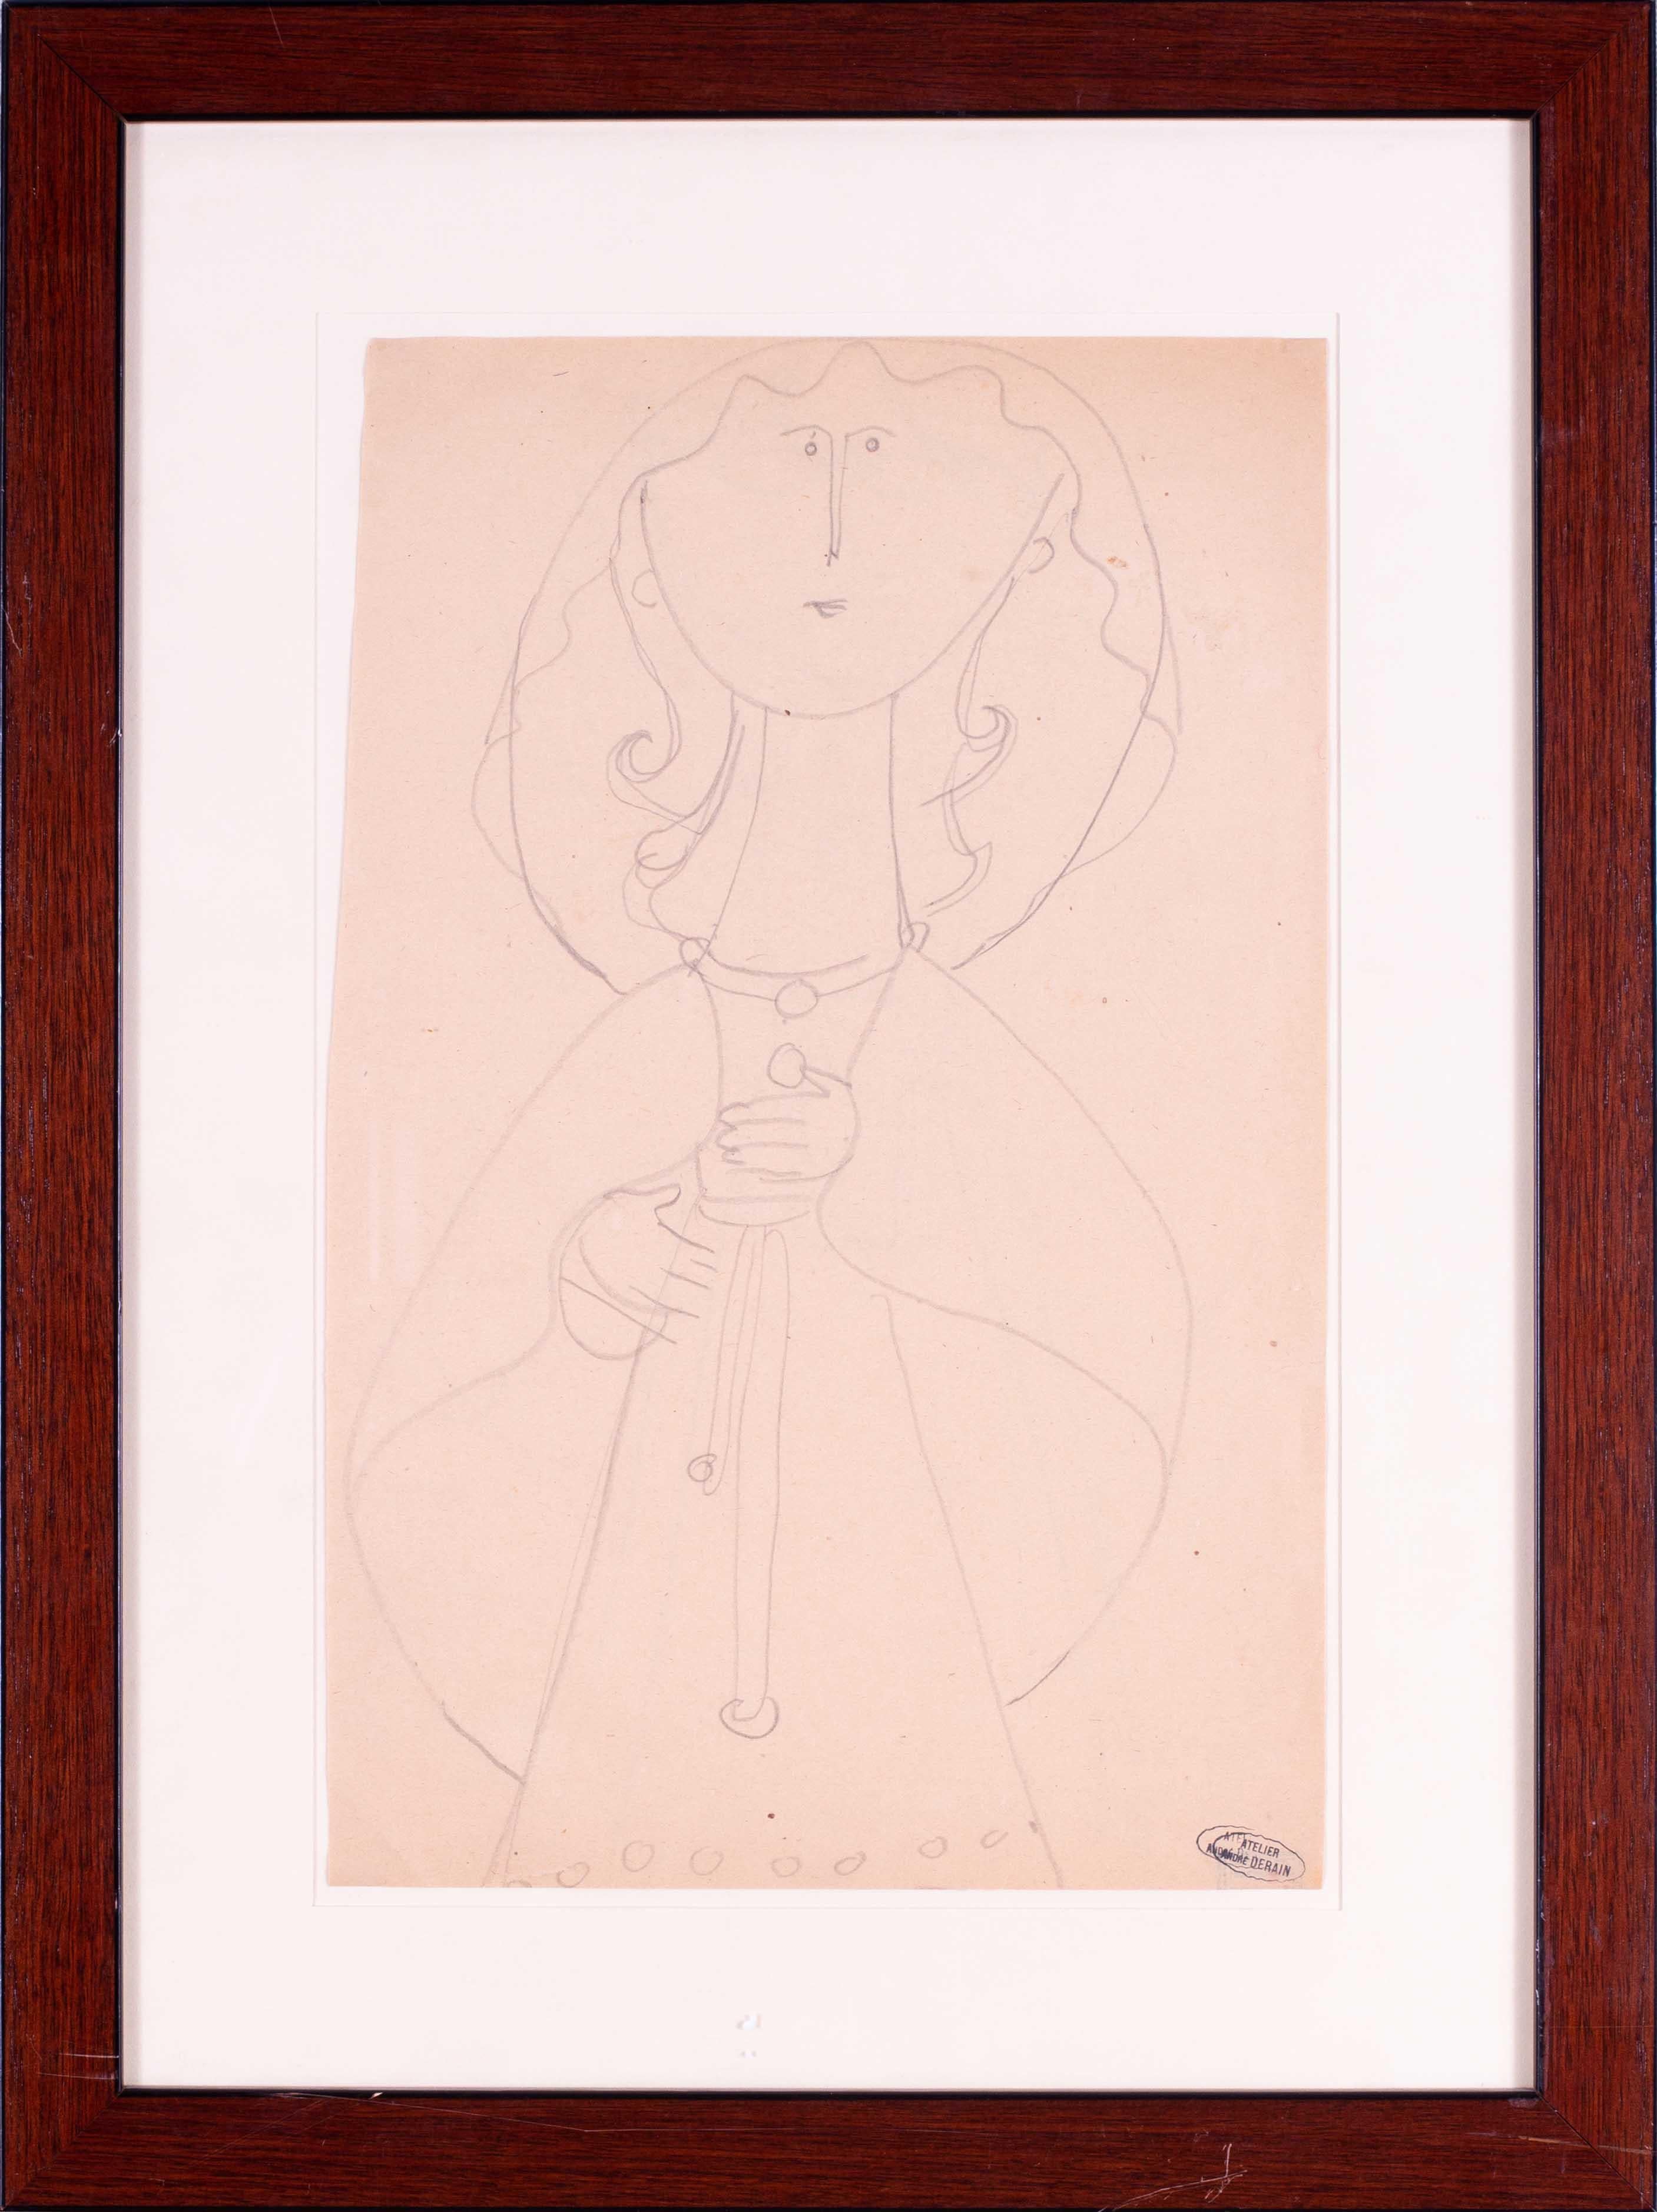 André Derain Figurative Art - Early 20th Century French Fauvist drawing by Andre Derain of a lady in a dress